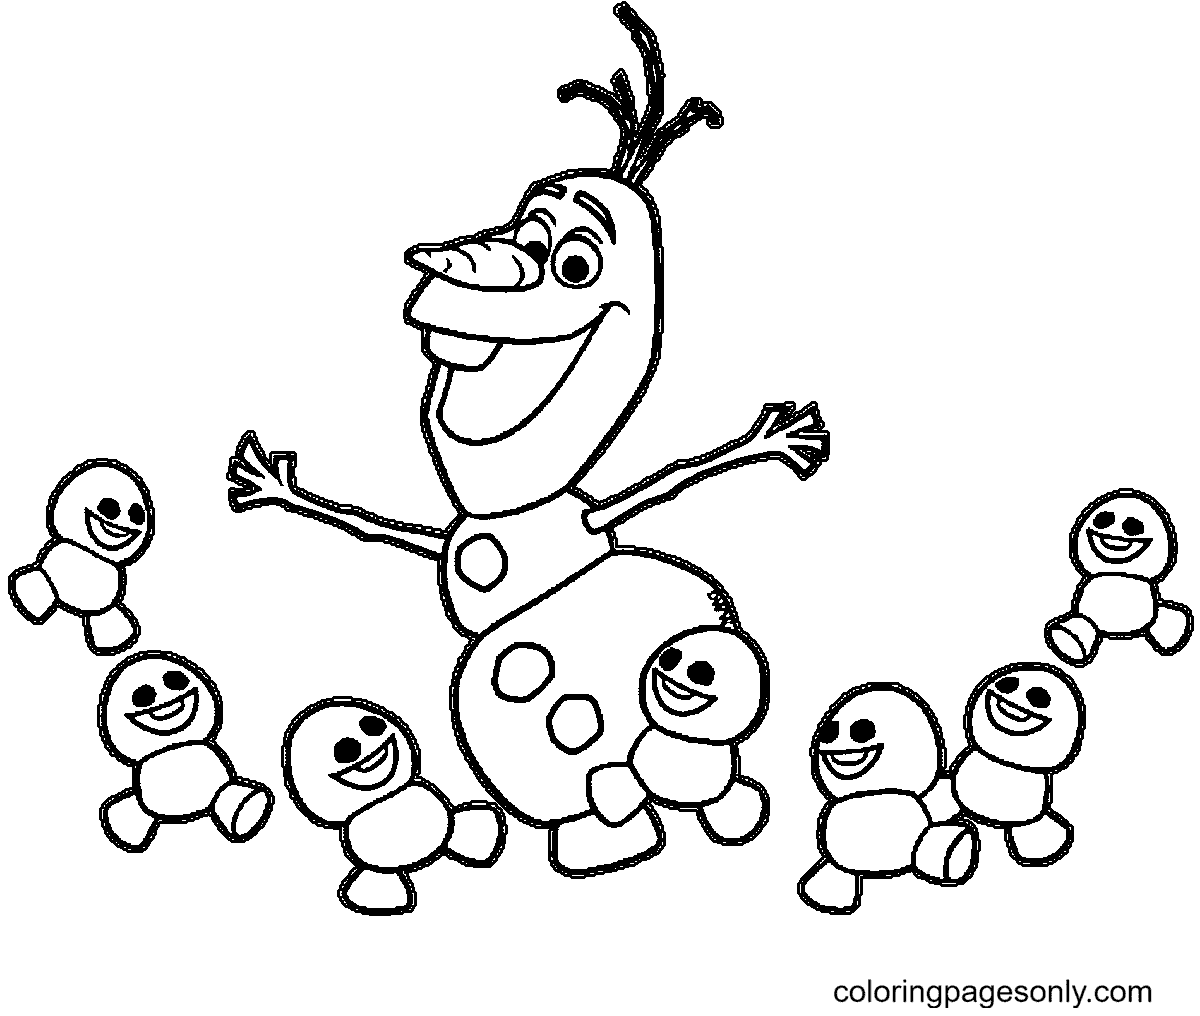 Olaf Dancing with Snowgies Coloring Pages